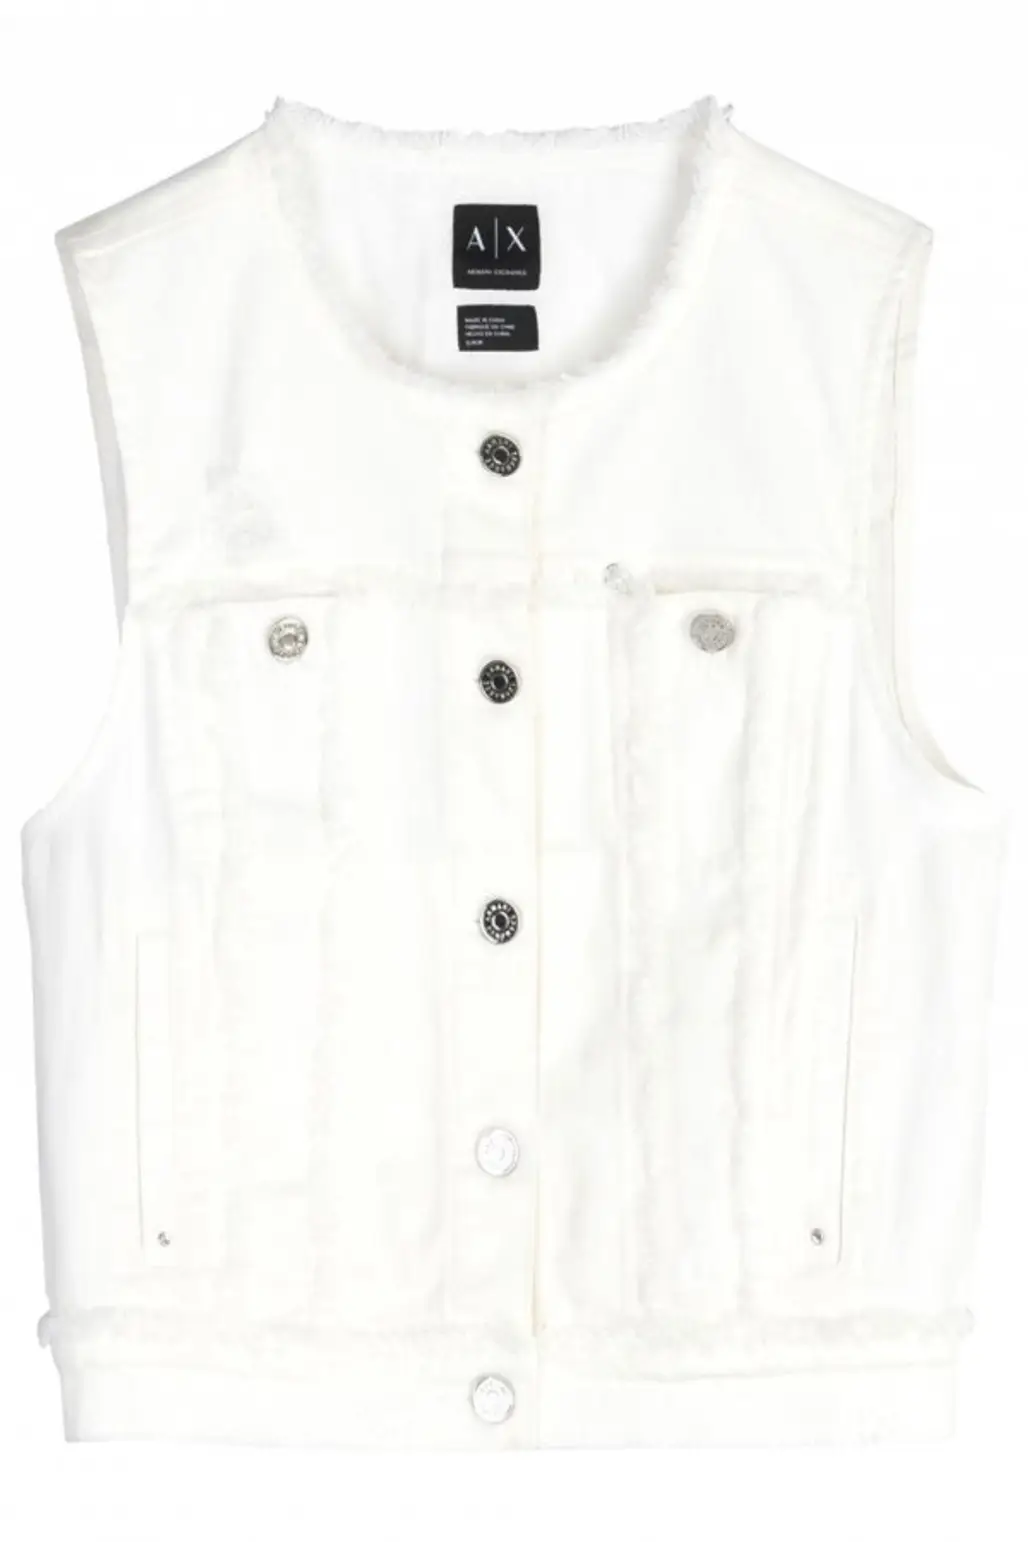 clothing, white, sleeve, outerwear, vest,